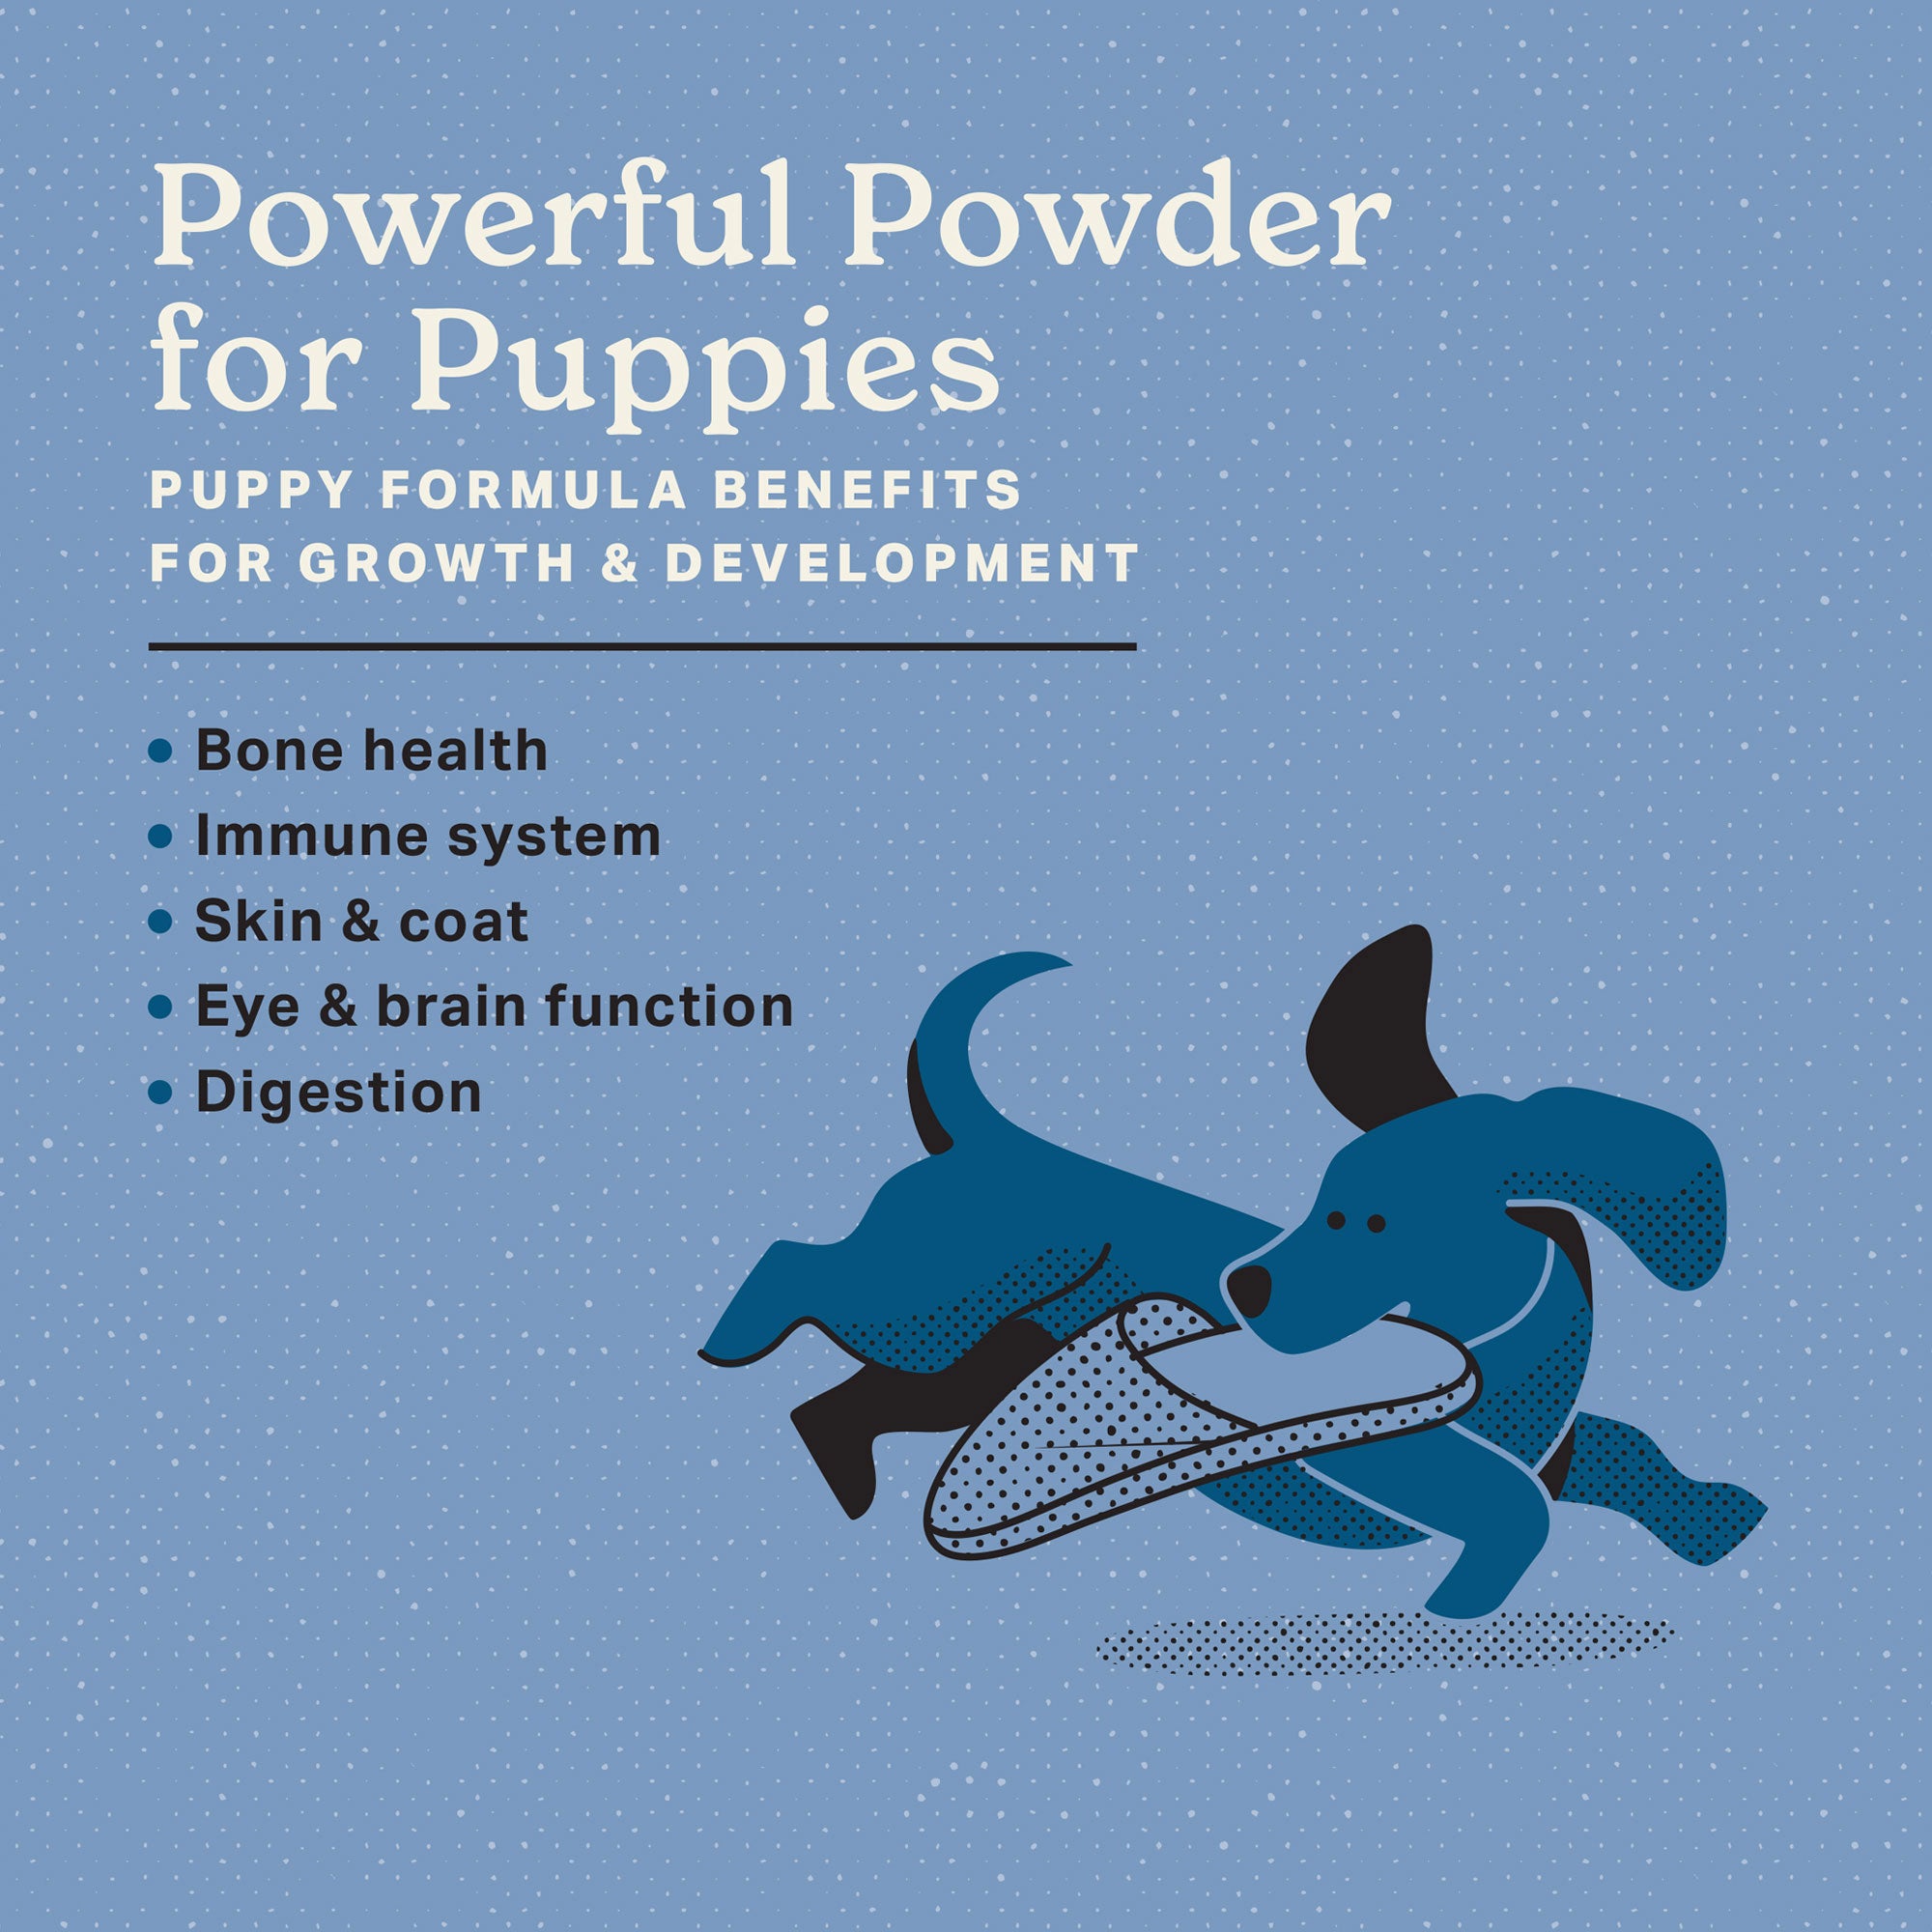 Powerful Powder for Puppies.  Puppy formula benefits for growth & development.  Bone health, immune system, skin & coat, eye & brain function, digestion. Animated Puppy carrying around a person slipper in its mouth.